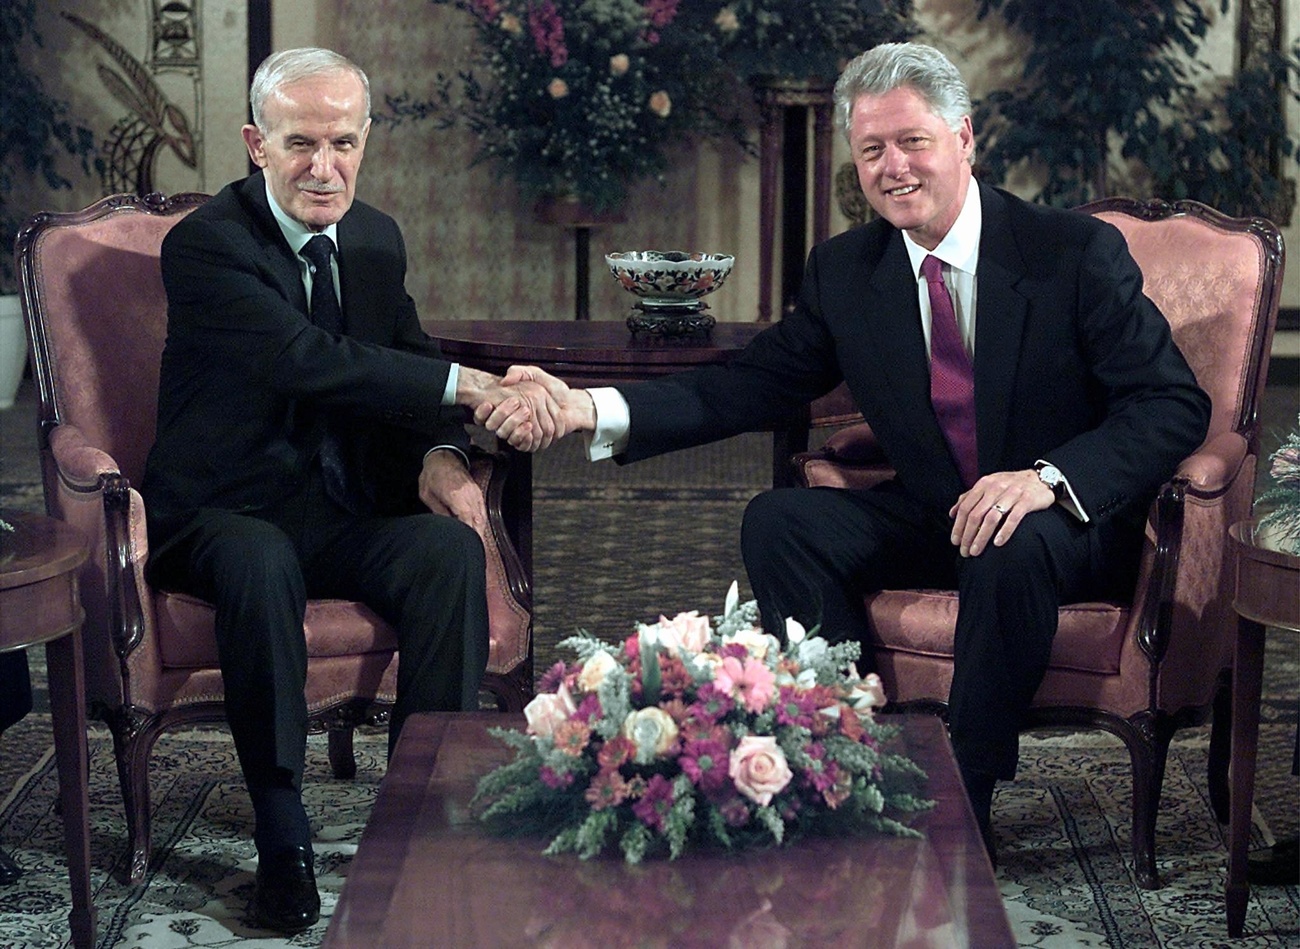 US President Bill Clinton, right, shakes hands with Syrian President Hafez Assad.